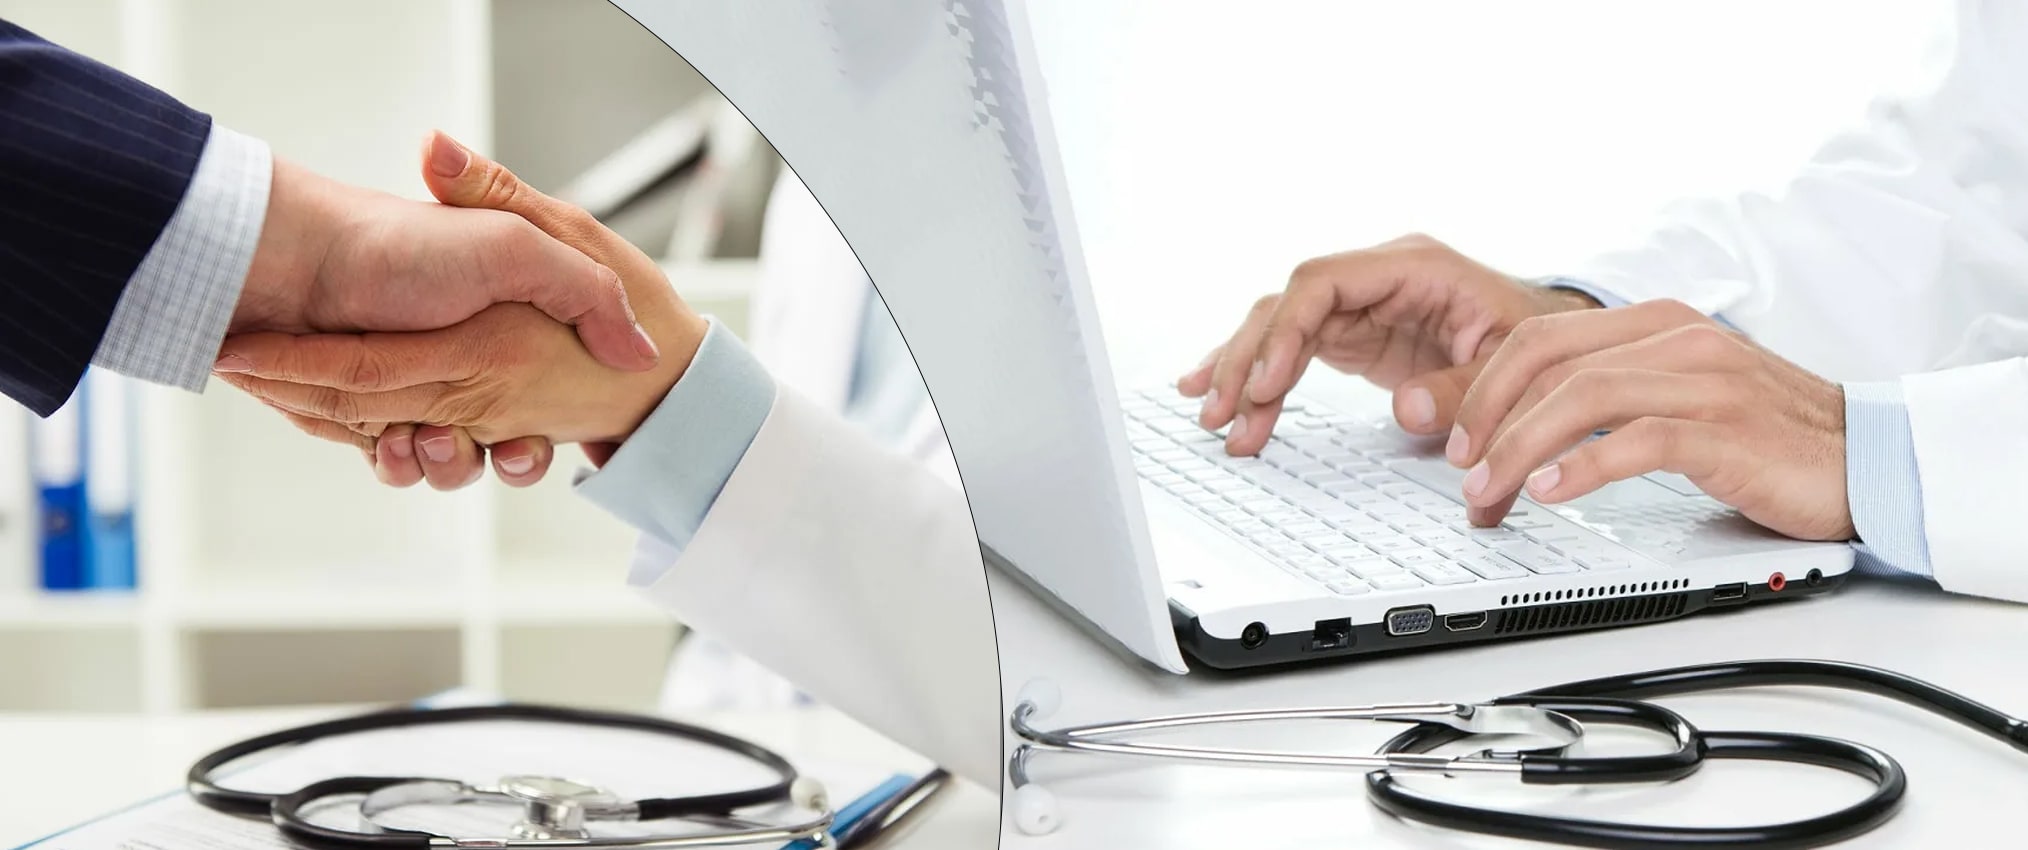 Need-for-Outsourcing-Healthcare-BPO-Outsourcing-Services